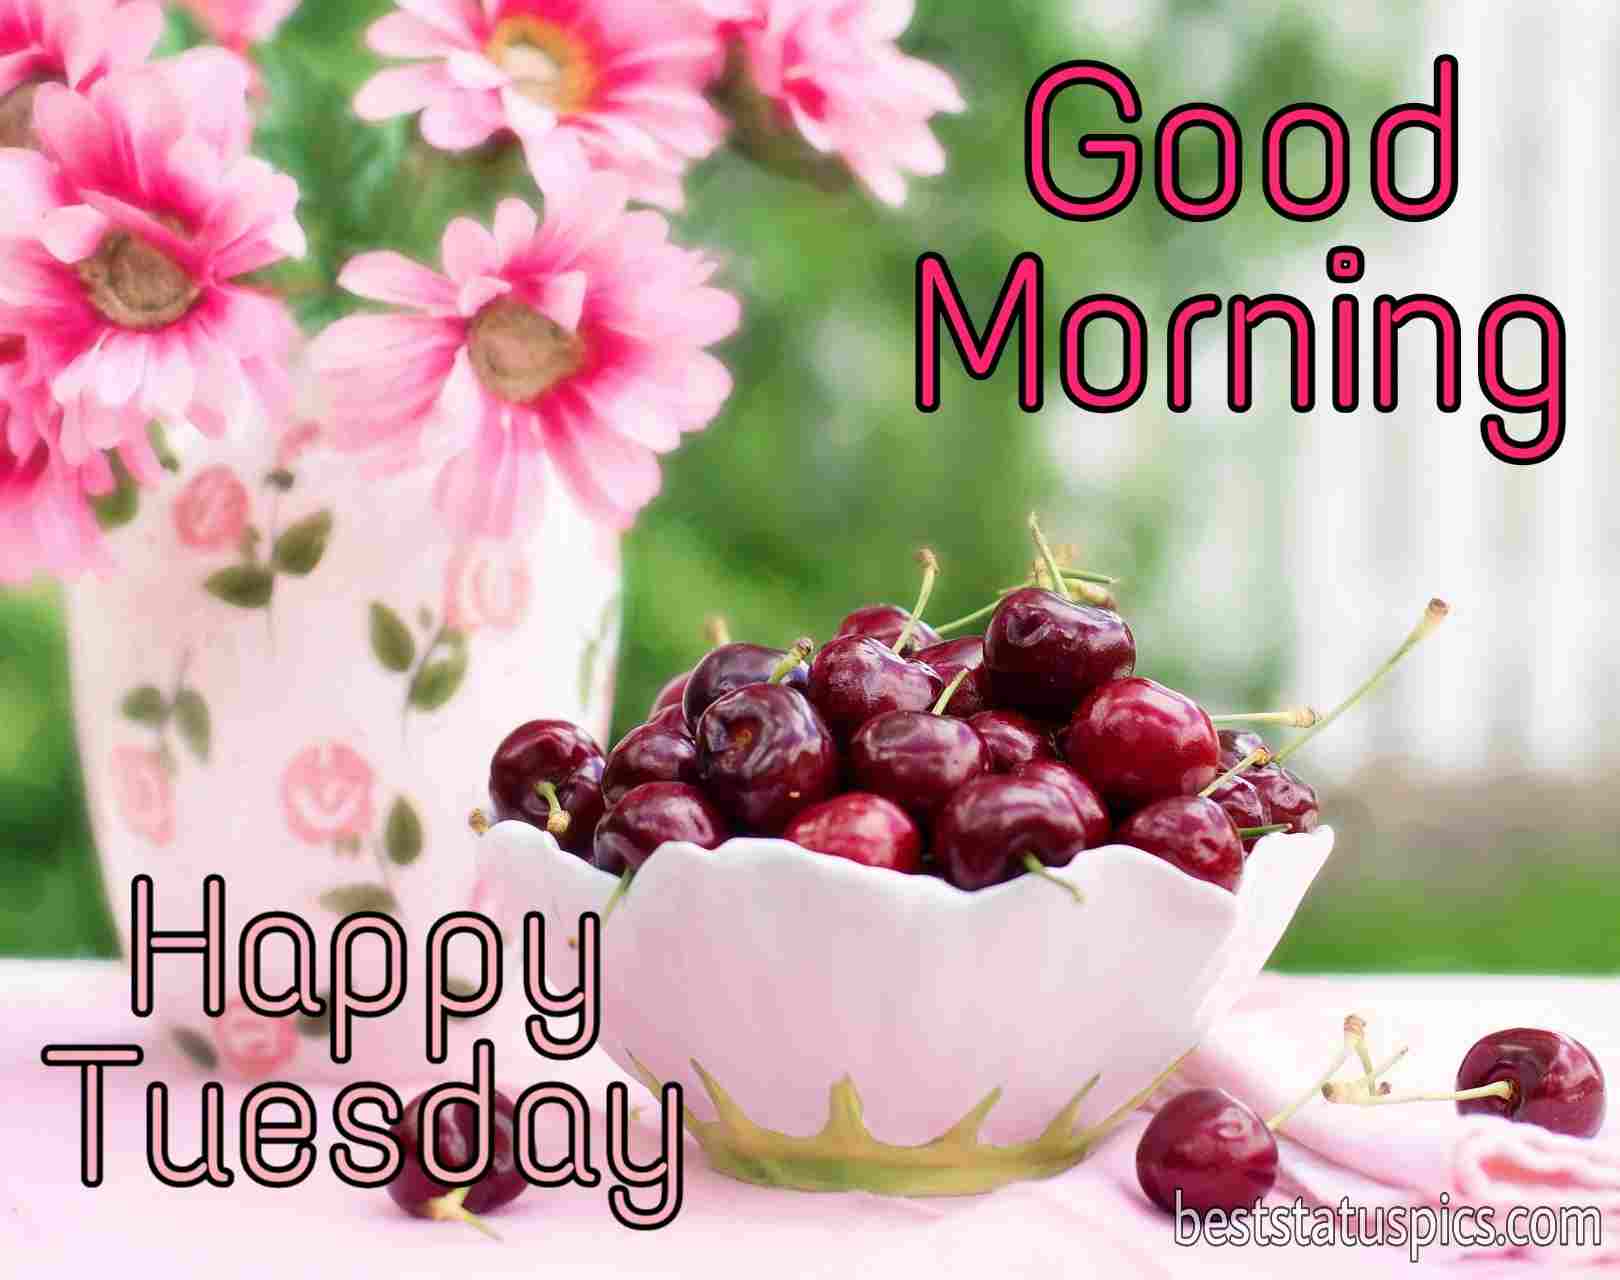 53 Good Morning Happy Tuesday Images Hd Wishes [2021] Best Status Pics